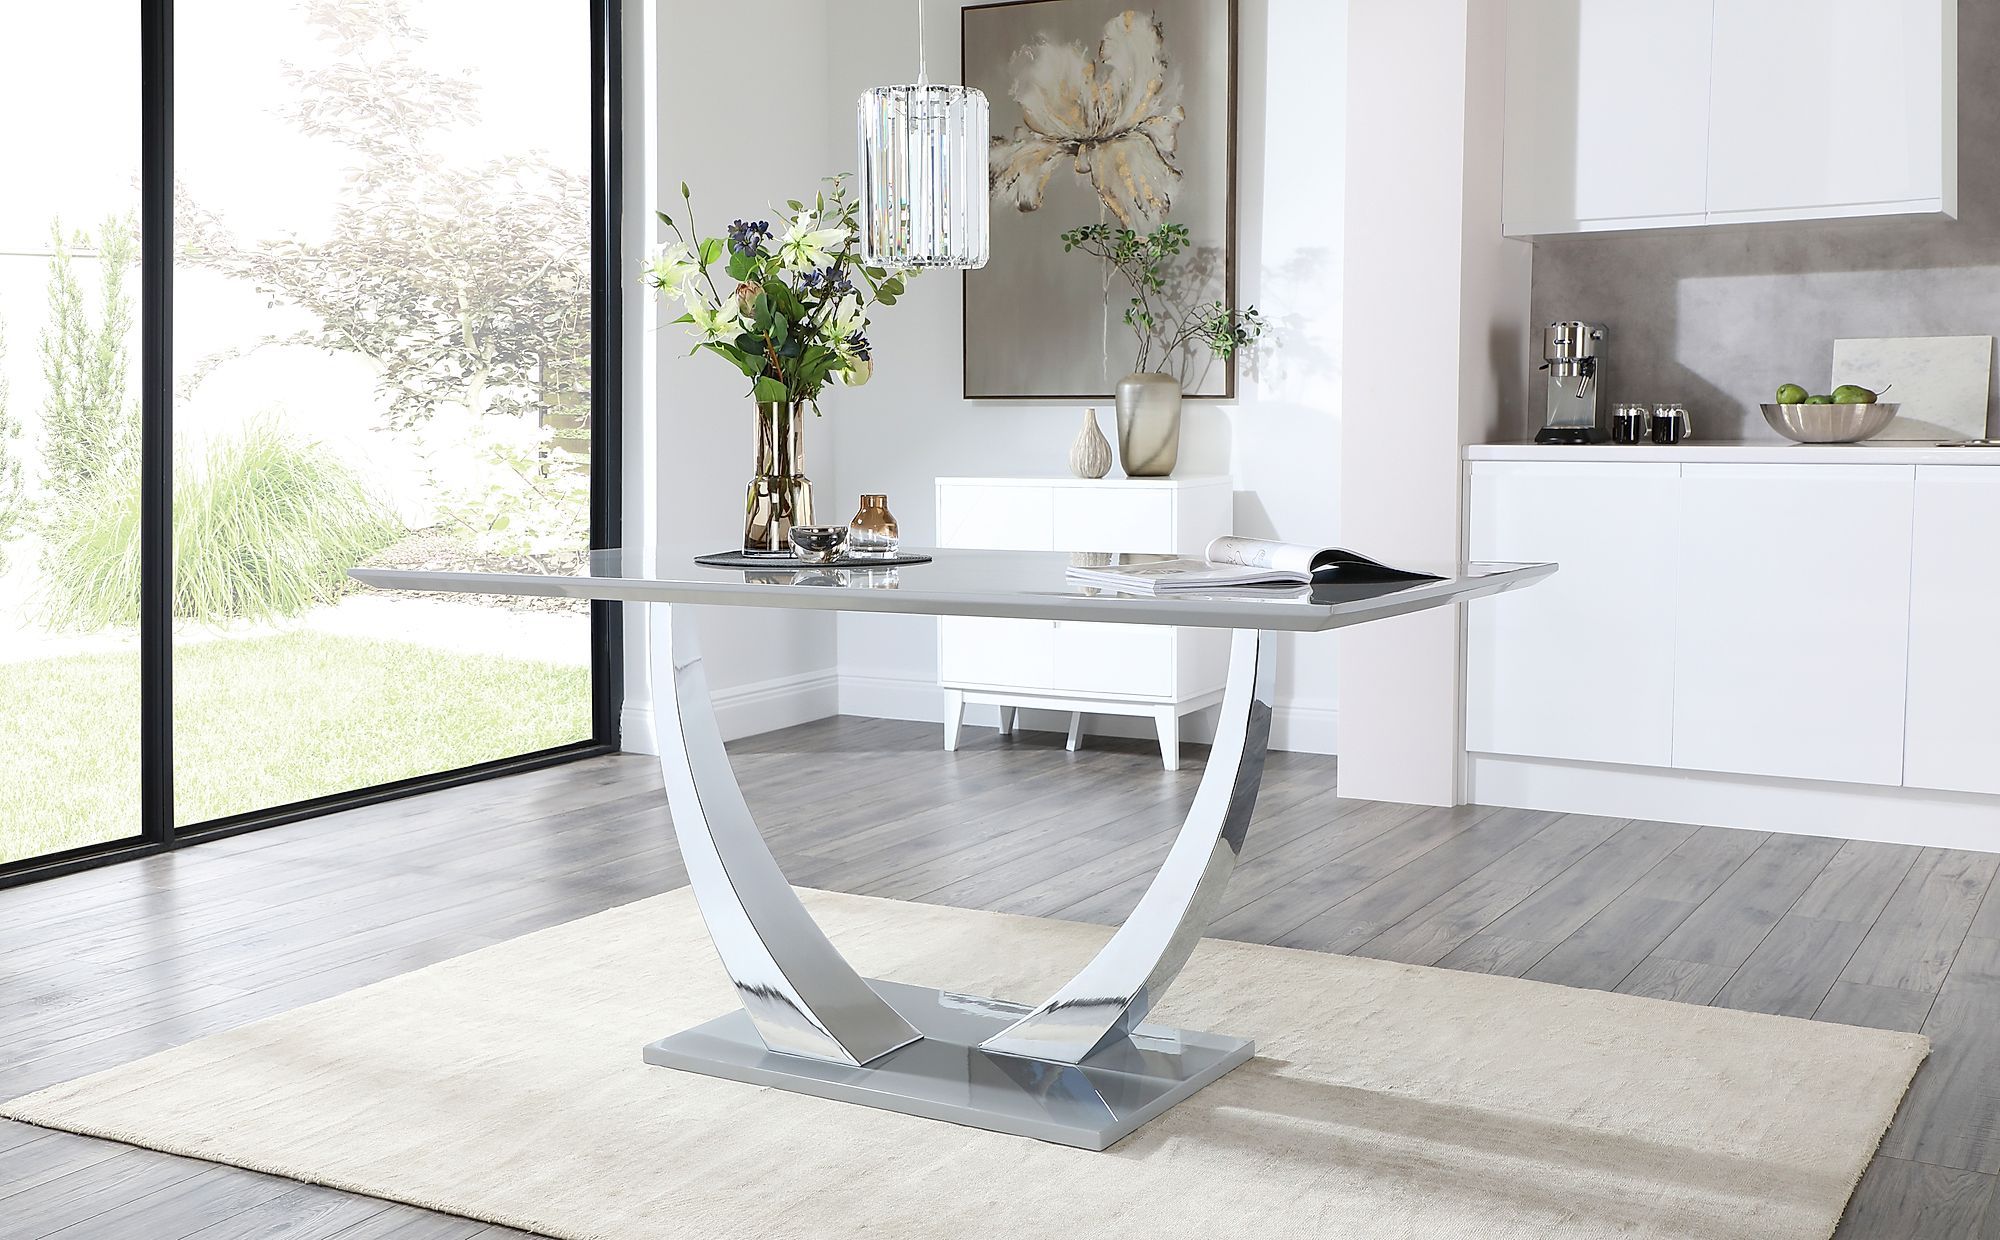 Peake Grey High Gloss And Chrome 160Cm Dining Table Inside 2018 Glossy Gray Dining Tables (View 10 of 15)